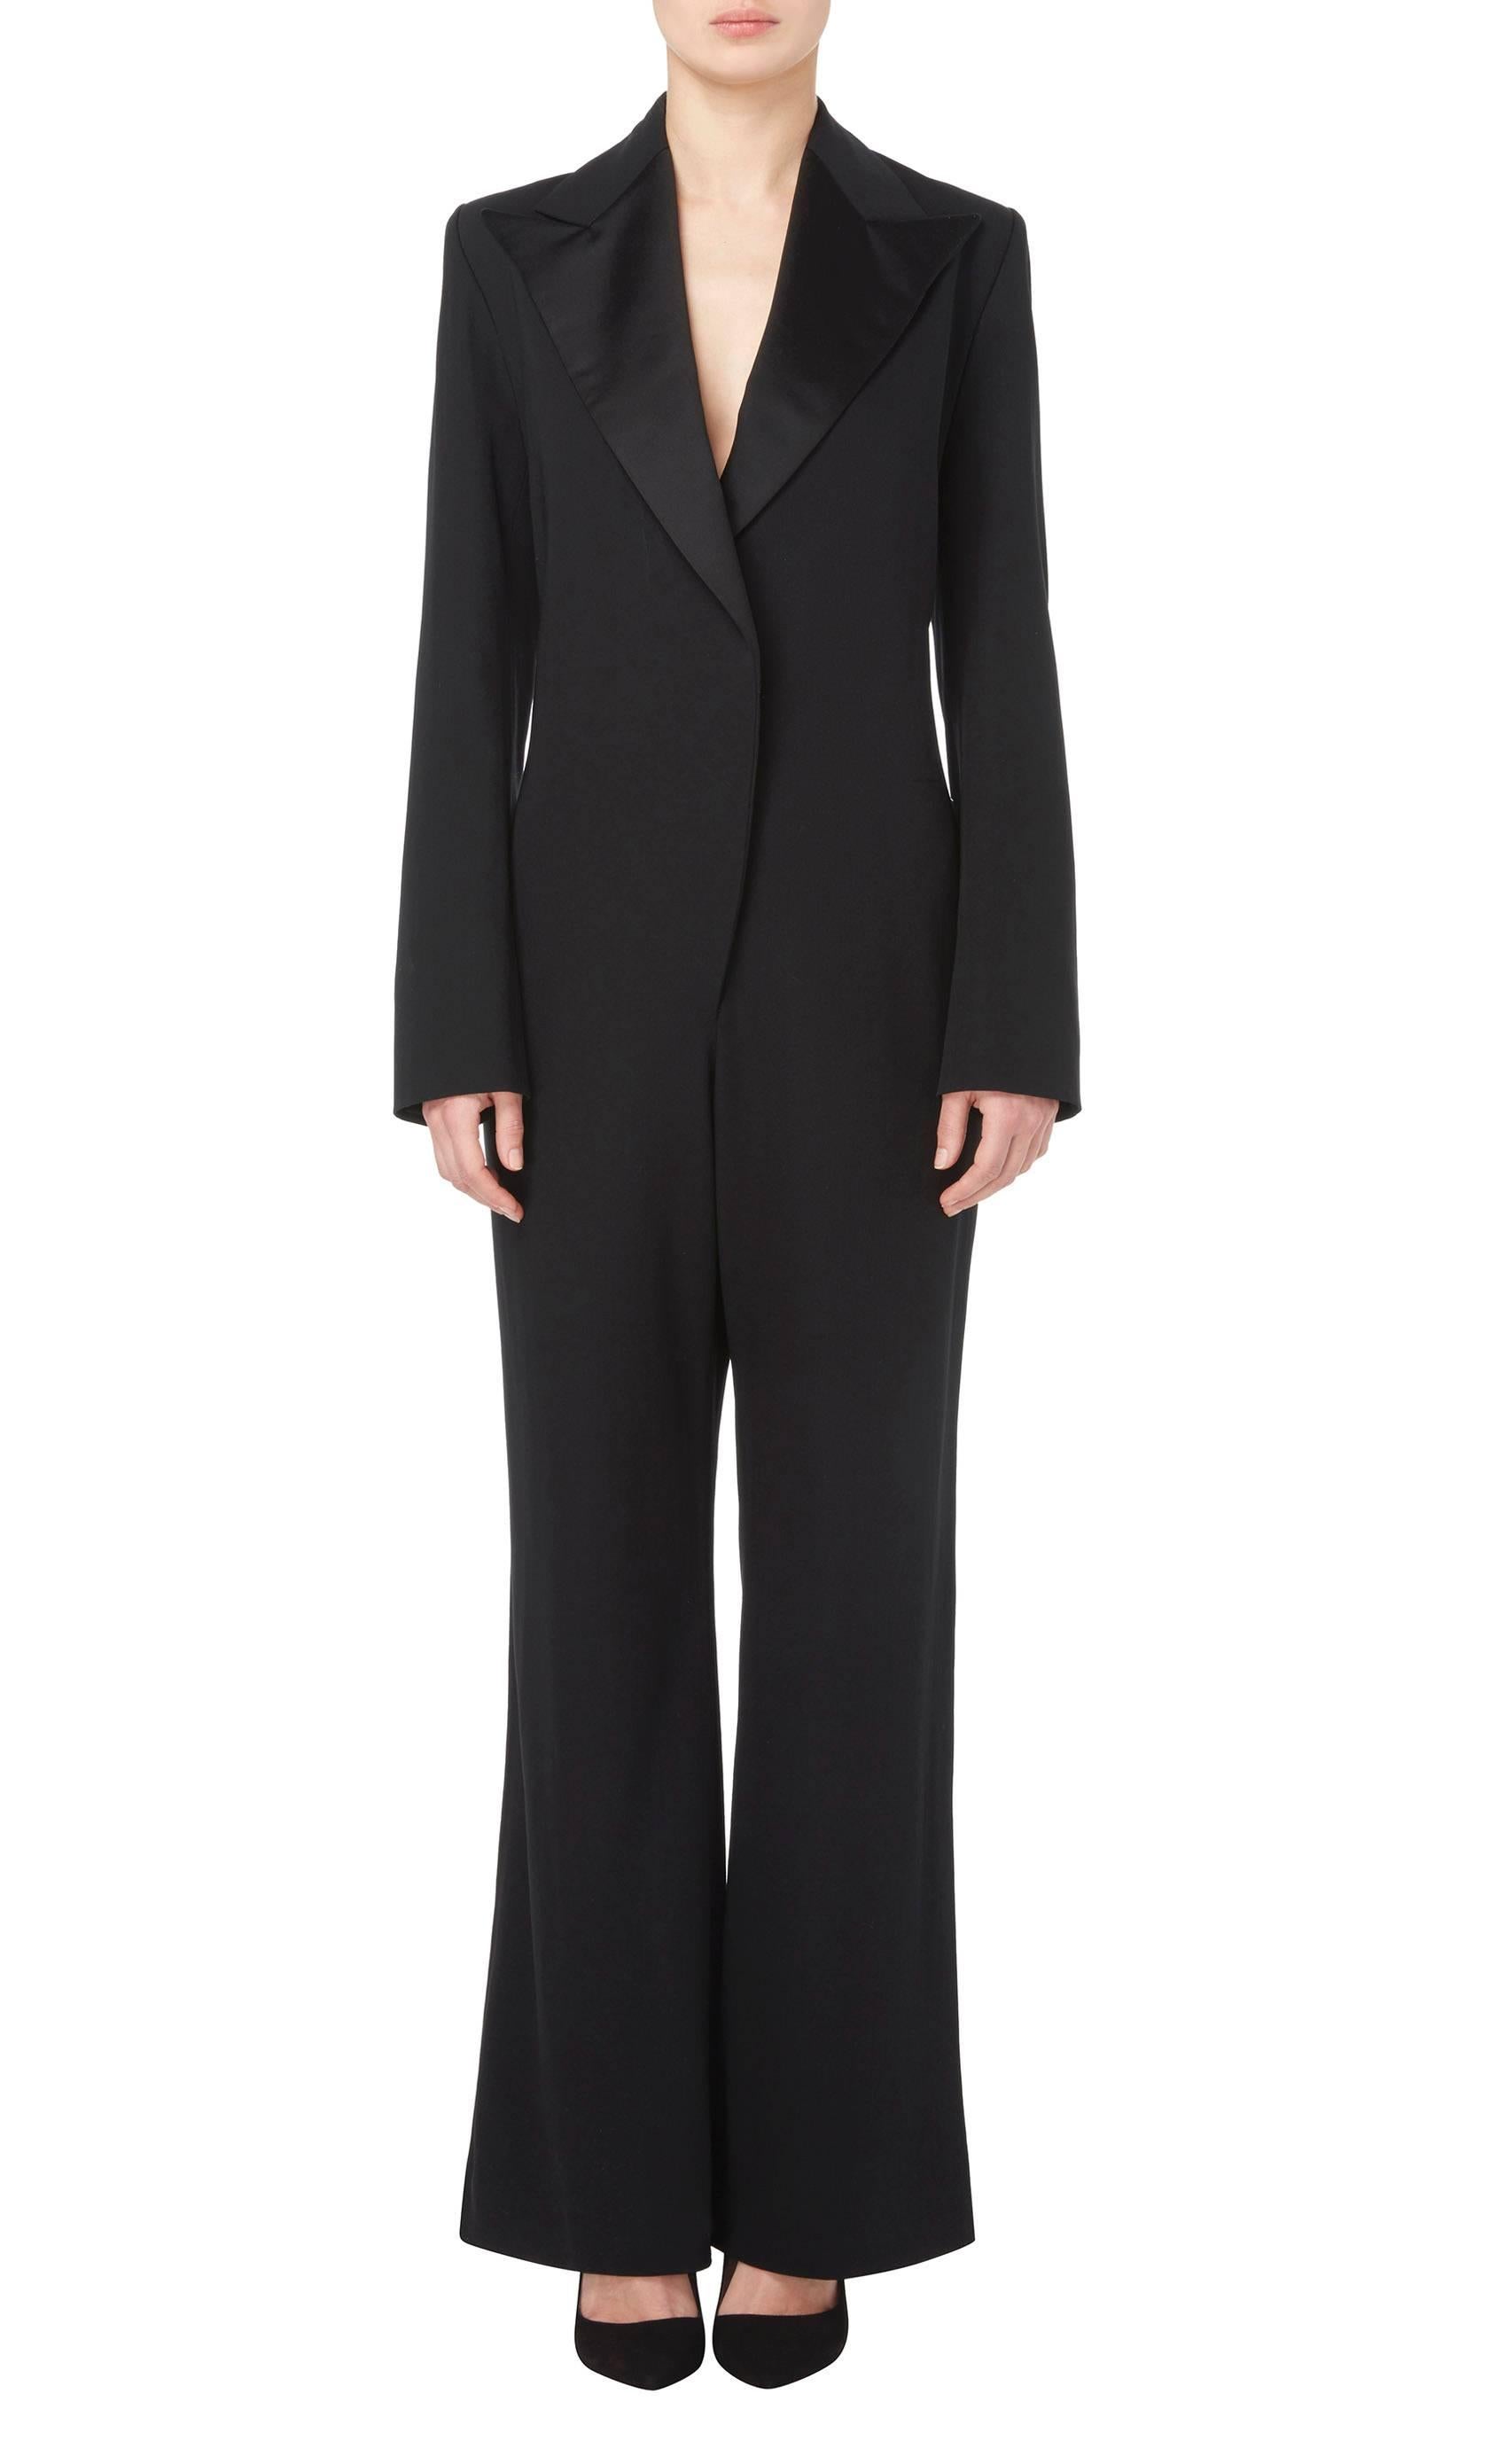 Constructed in black silk
Featuring a double lapel collar and padded shoulders
Press studs fastening to the front of the waist
Excellent condition with the original label, lining and fastenings
Professionally dry cleaned and